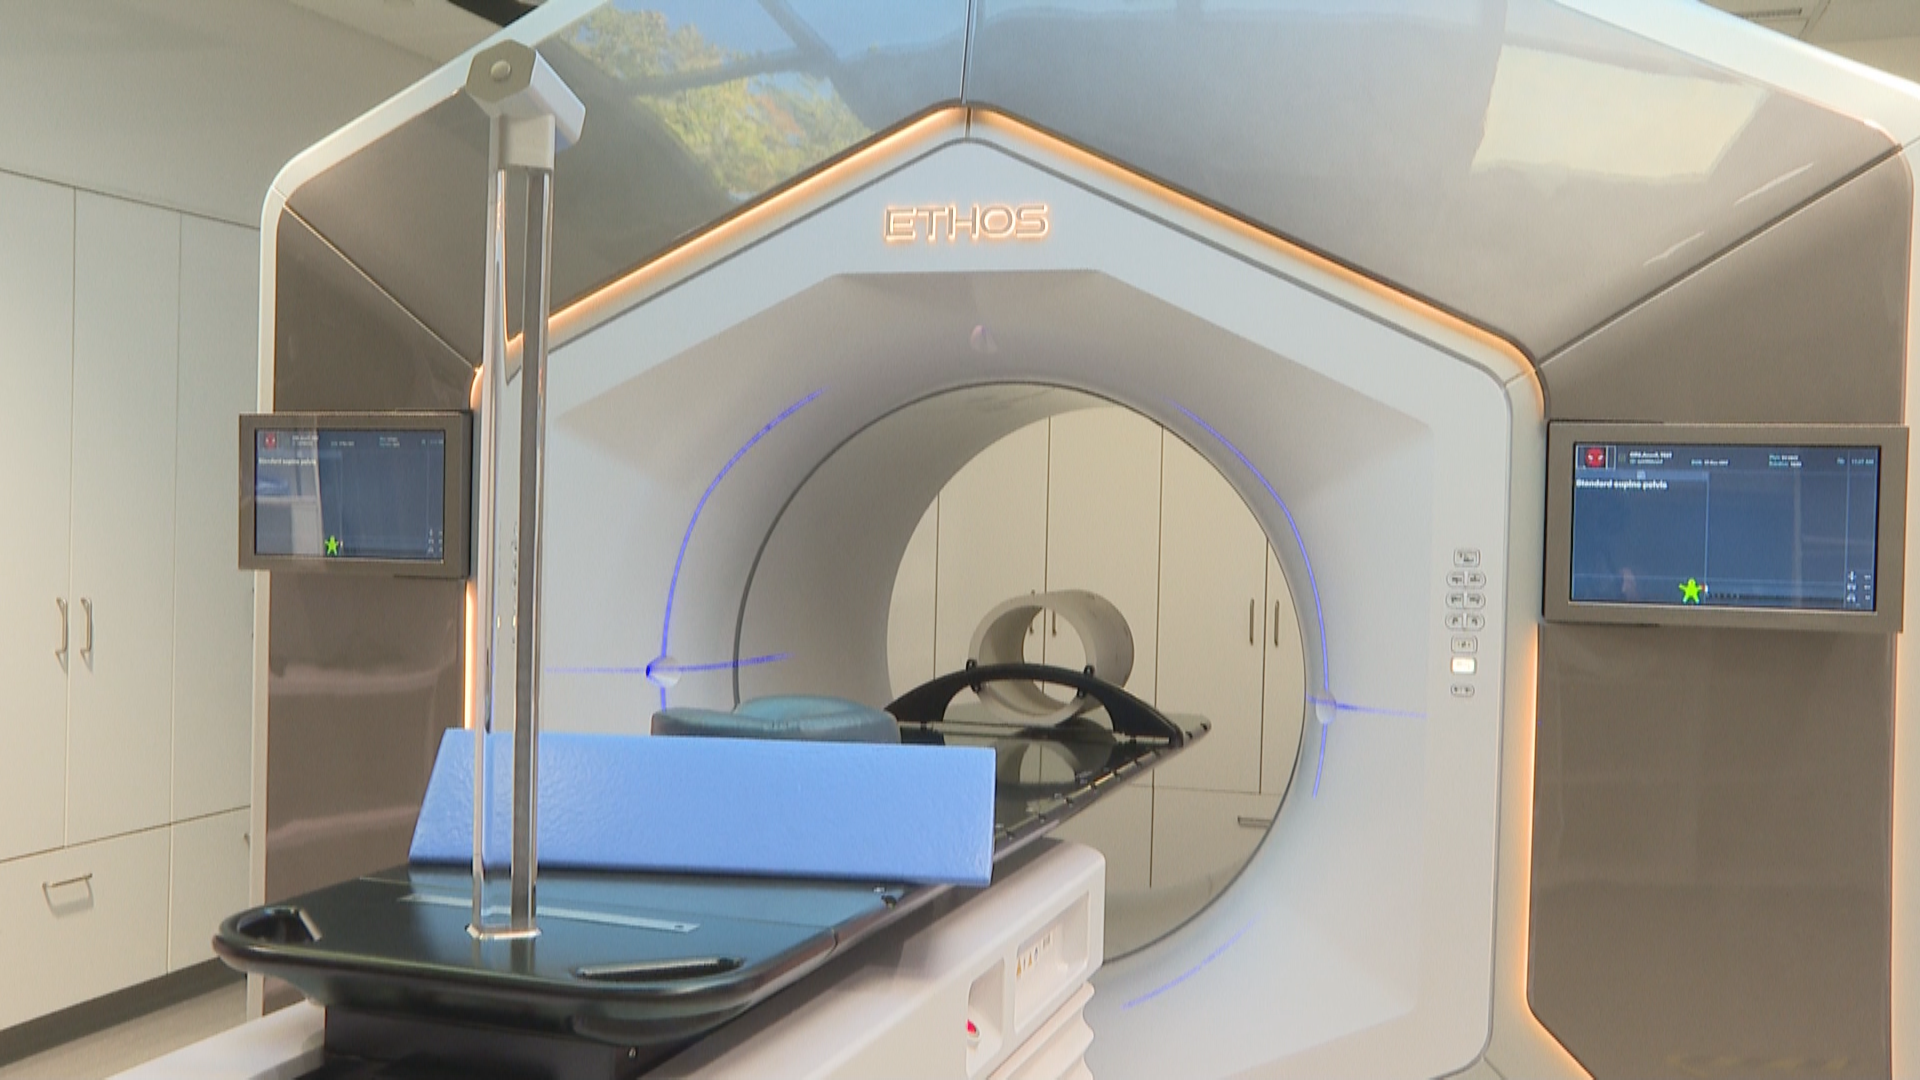 New adaptive radiation therapy unit first of its kind in Canada